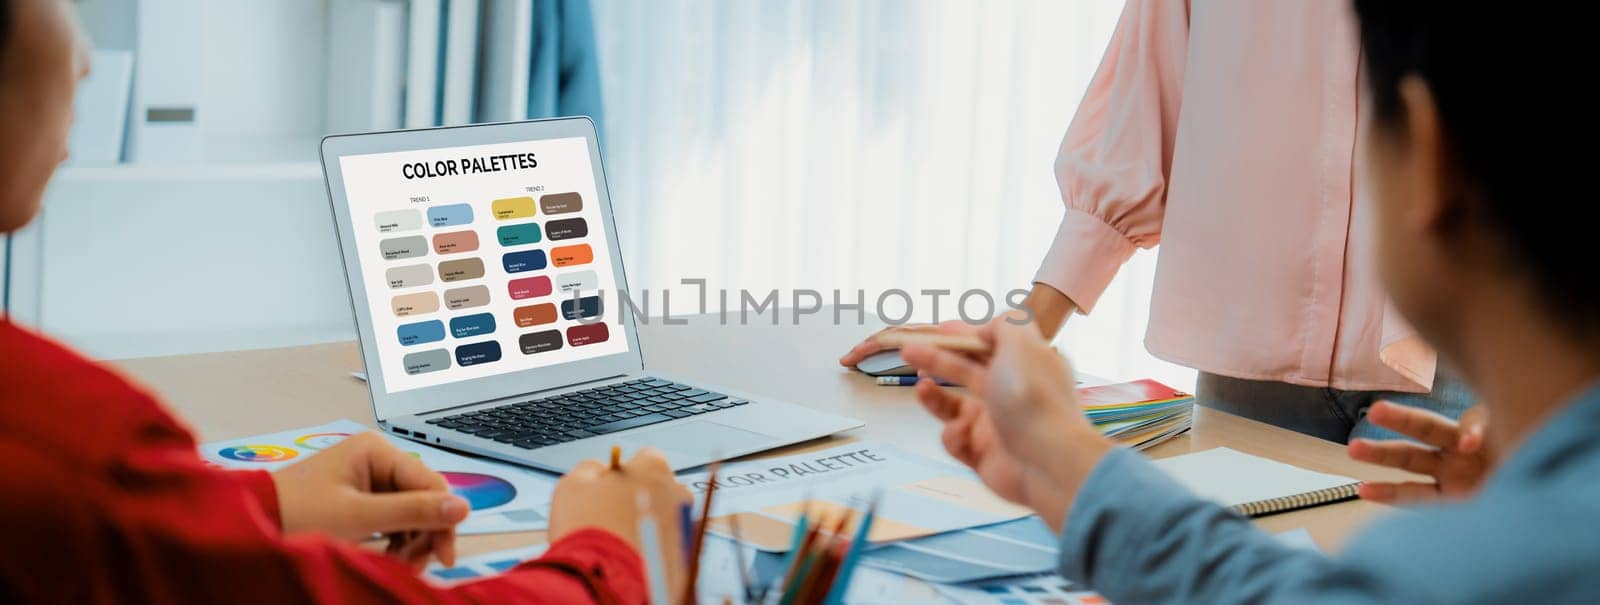 A portrait of creativity graphic designer team select appropriate color for the project by using laptop on table with equipment and designing tool scatter around at modern office. Closeup. Variegated.